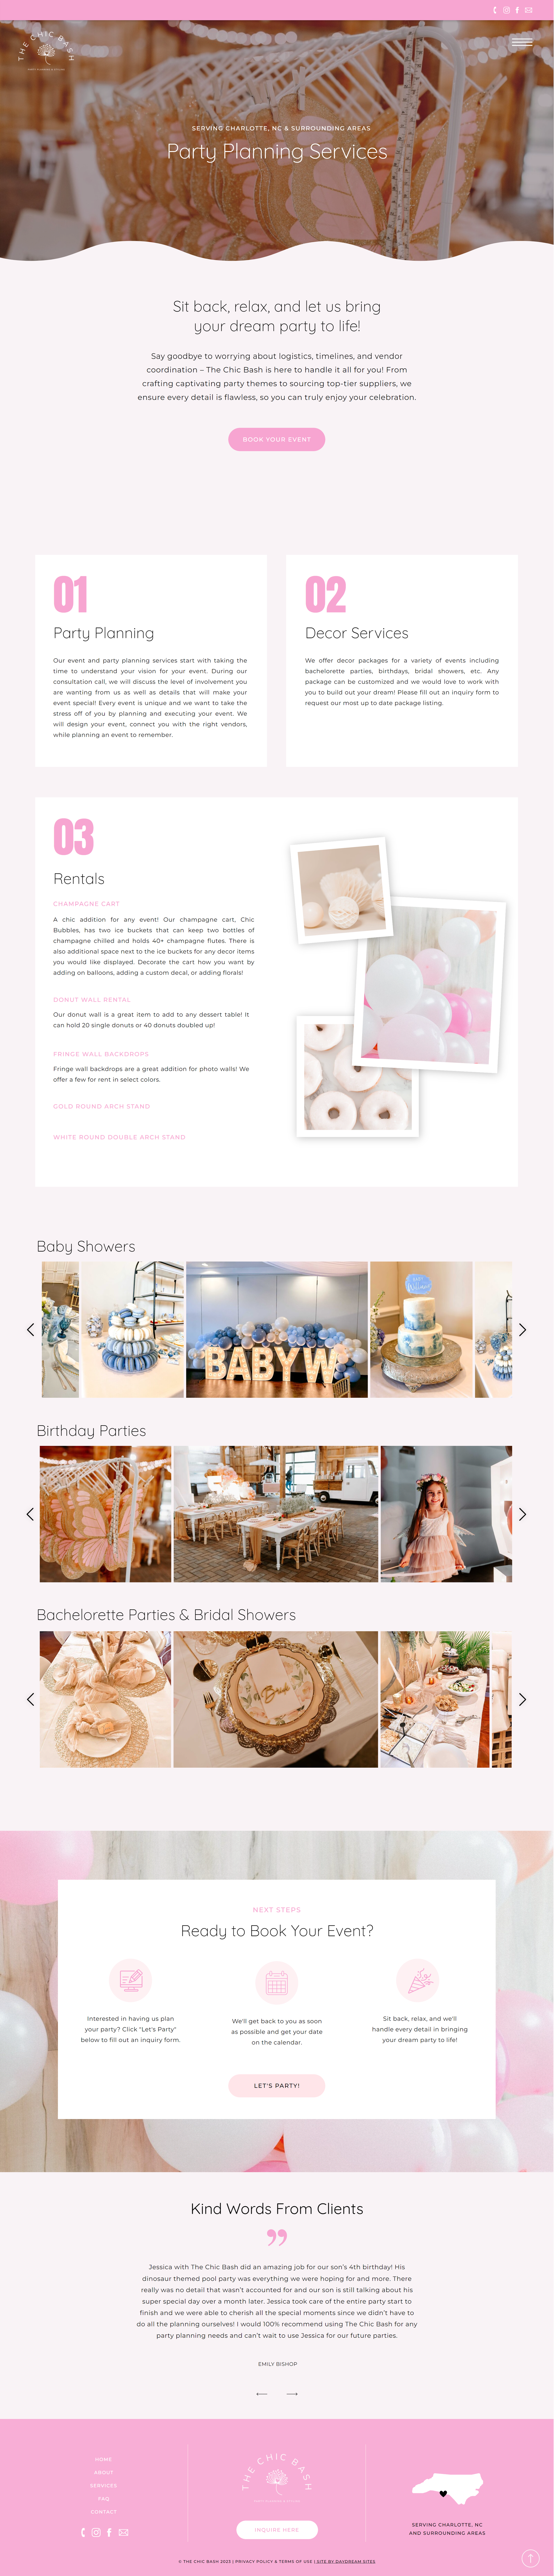 Party planner website services page built on Showit